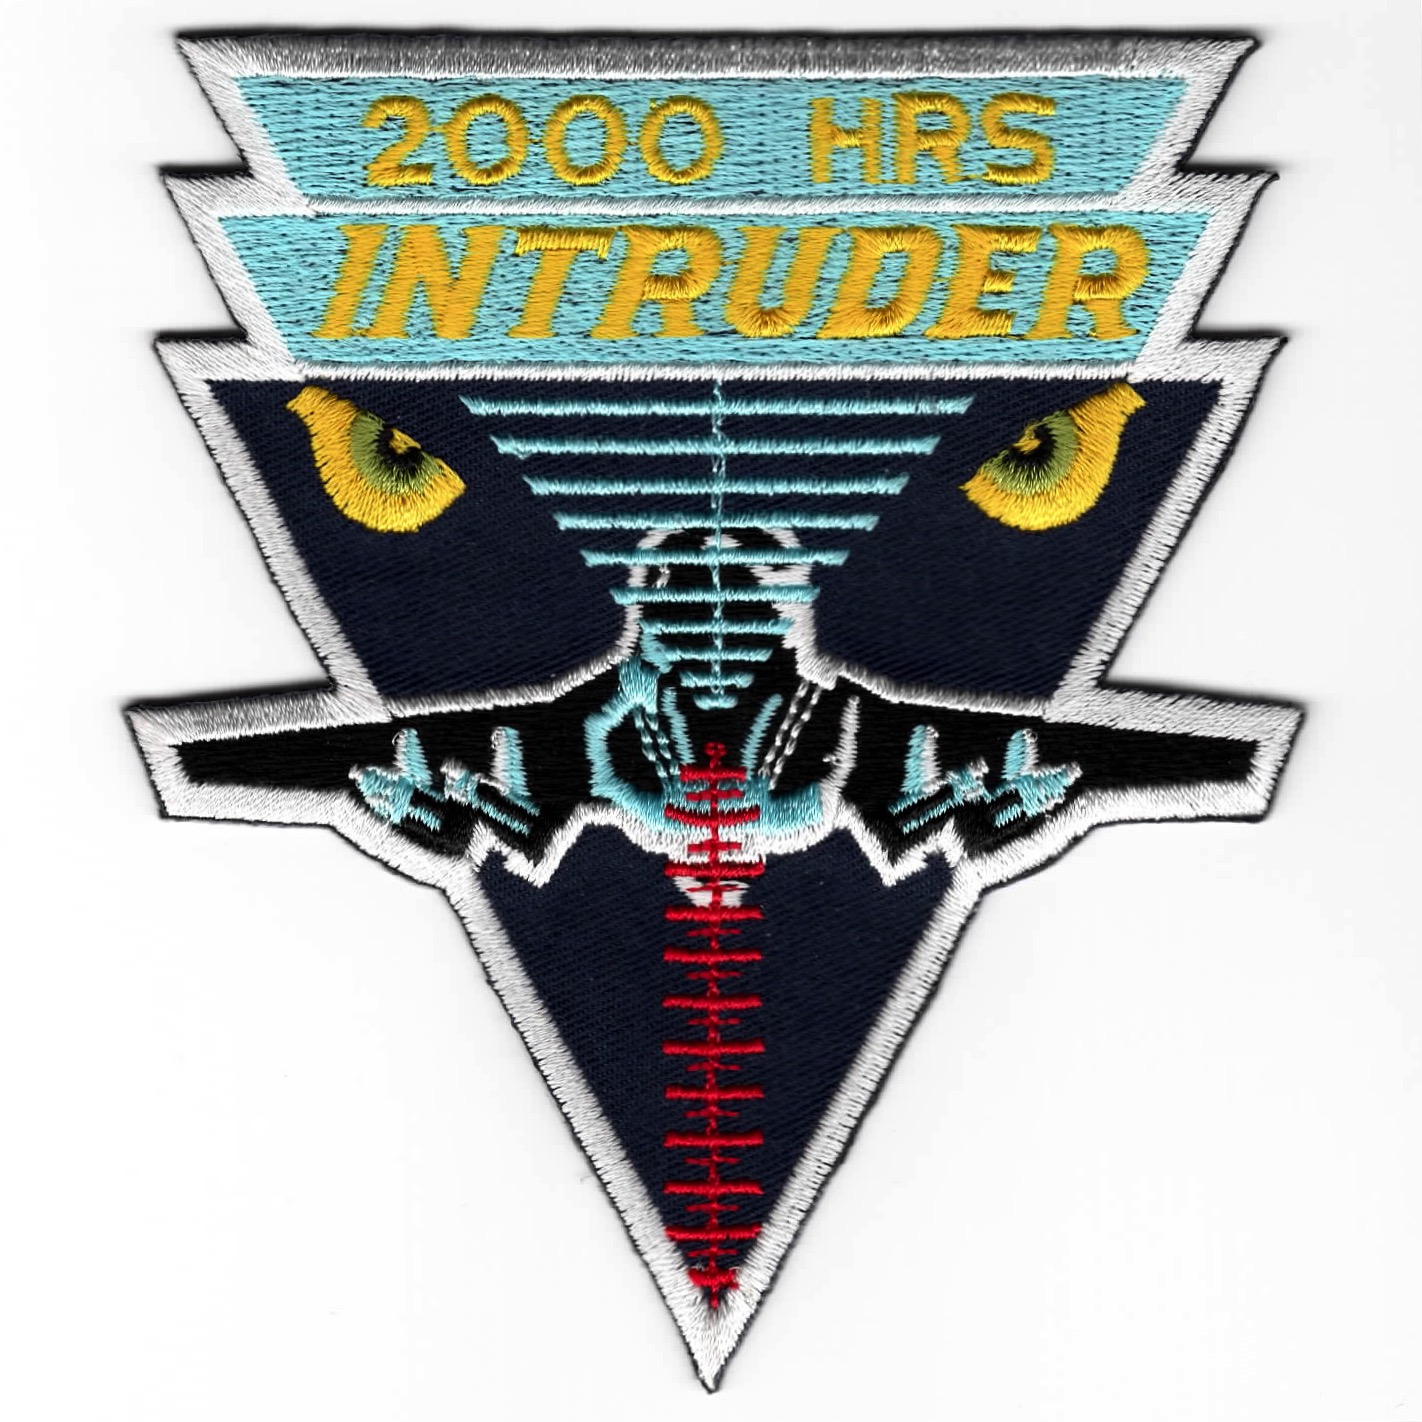 (NG) A-6 Intruder '2000 Hours' Patch (White Border)